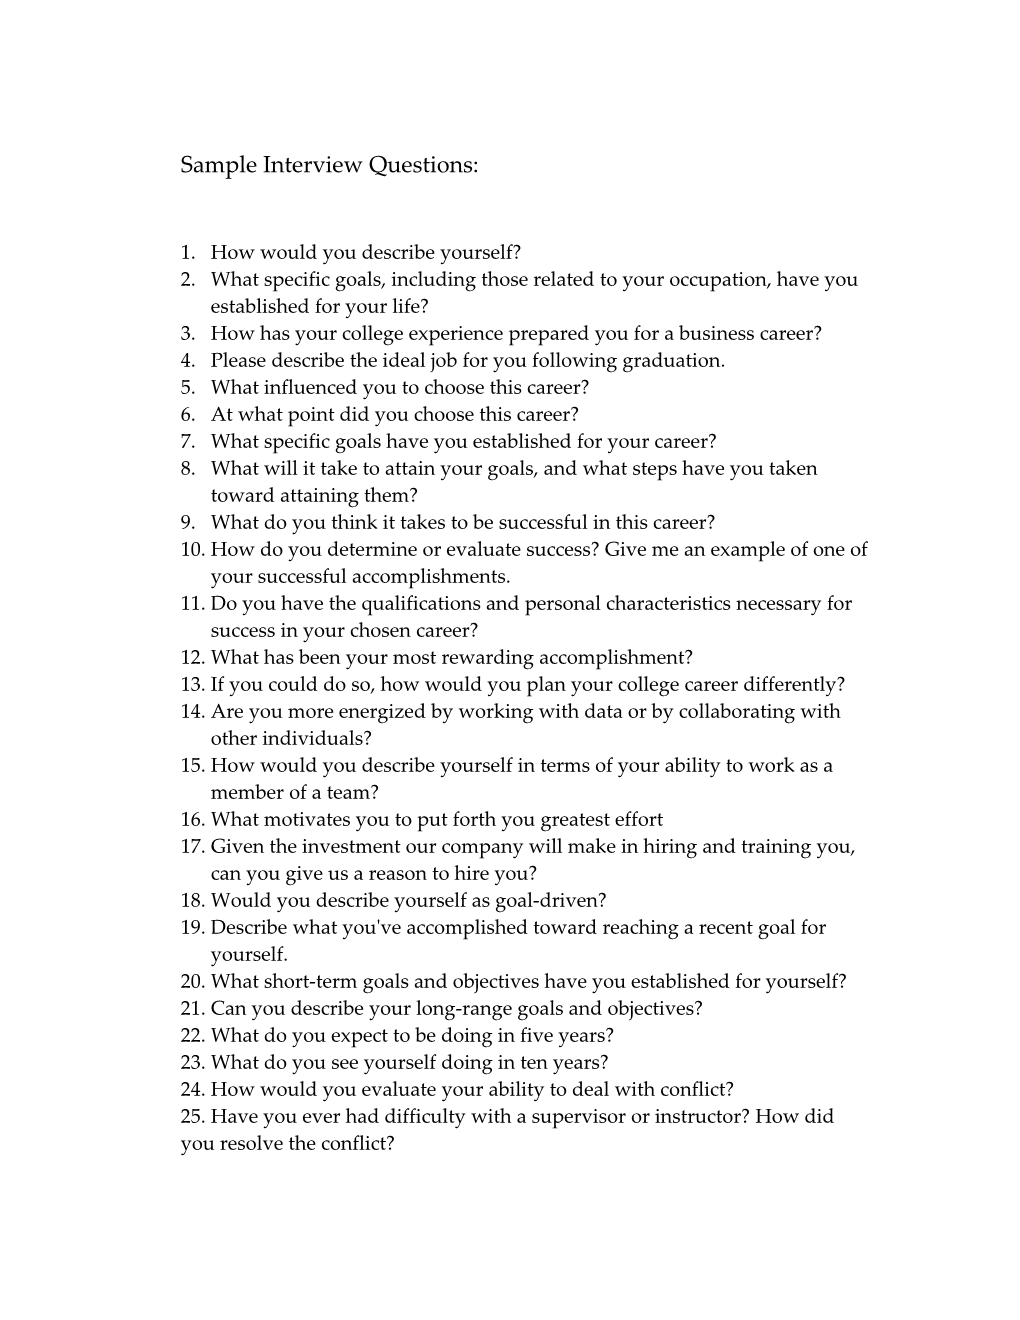 Sample Interview Questions s2